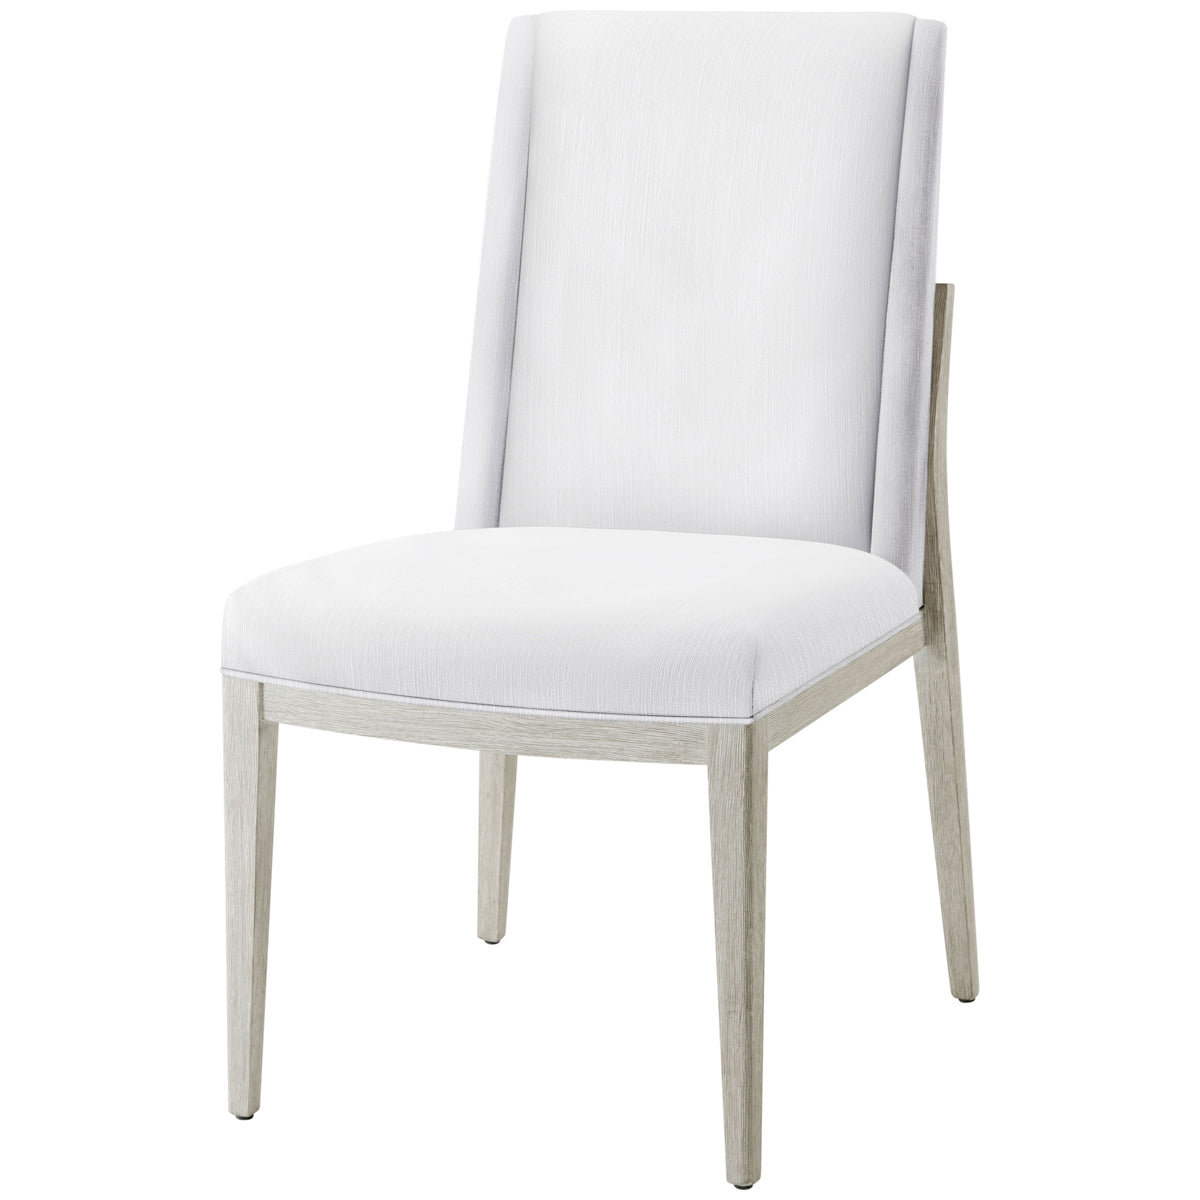 Theodore Alexander Breeze Upholstered Side Chair, Set of 2